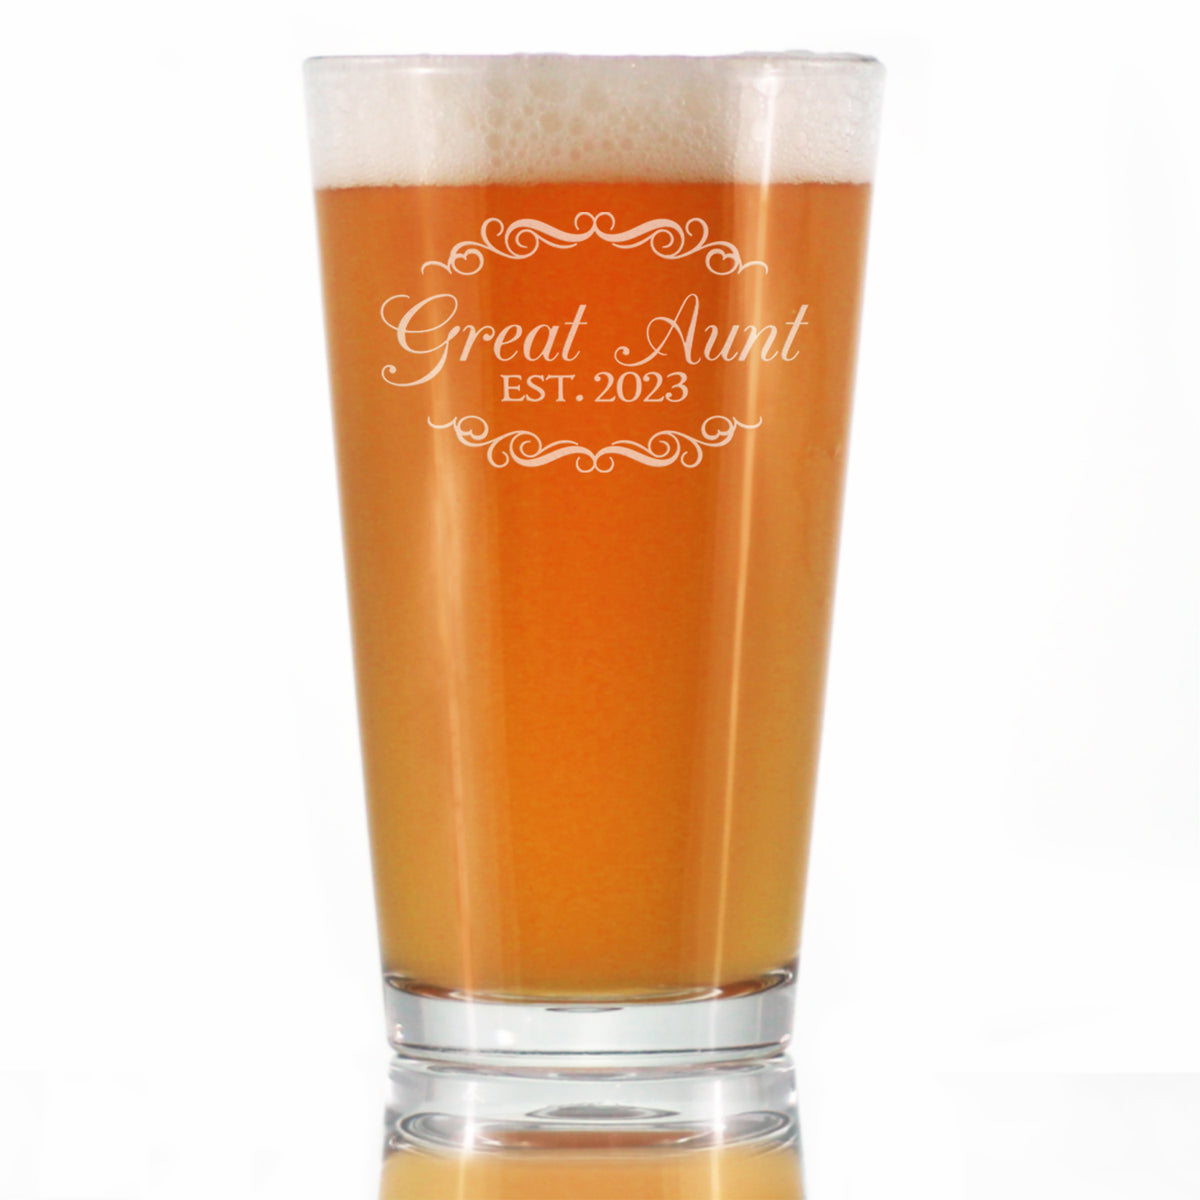 Great Aunt Est. 2023 - Decorative - 16 oz Pint Glass for Beer - Gifts for Women, Baby Reveal